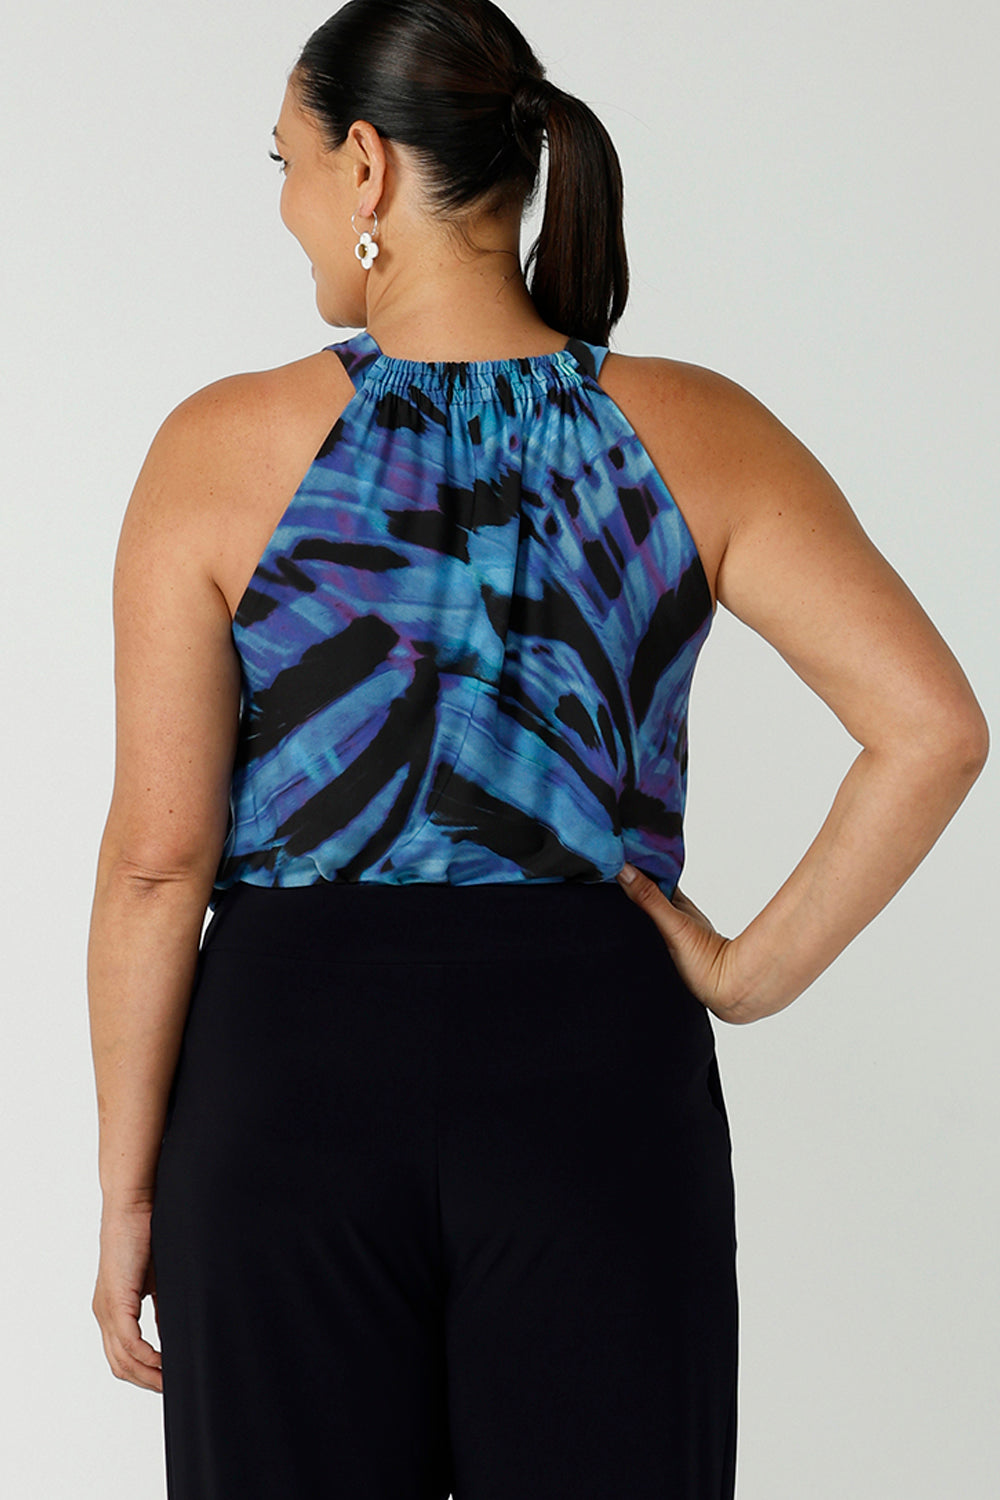 Back view of woman wearing tie neck tie top Iris in Flutter with a blue digital print. Size inclusive clothes for women size 8 - 24. Digital blue and purple print. Made in Australia.